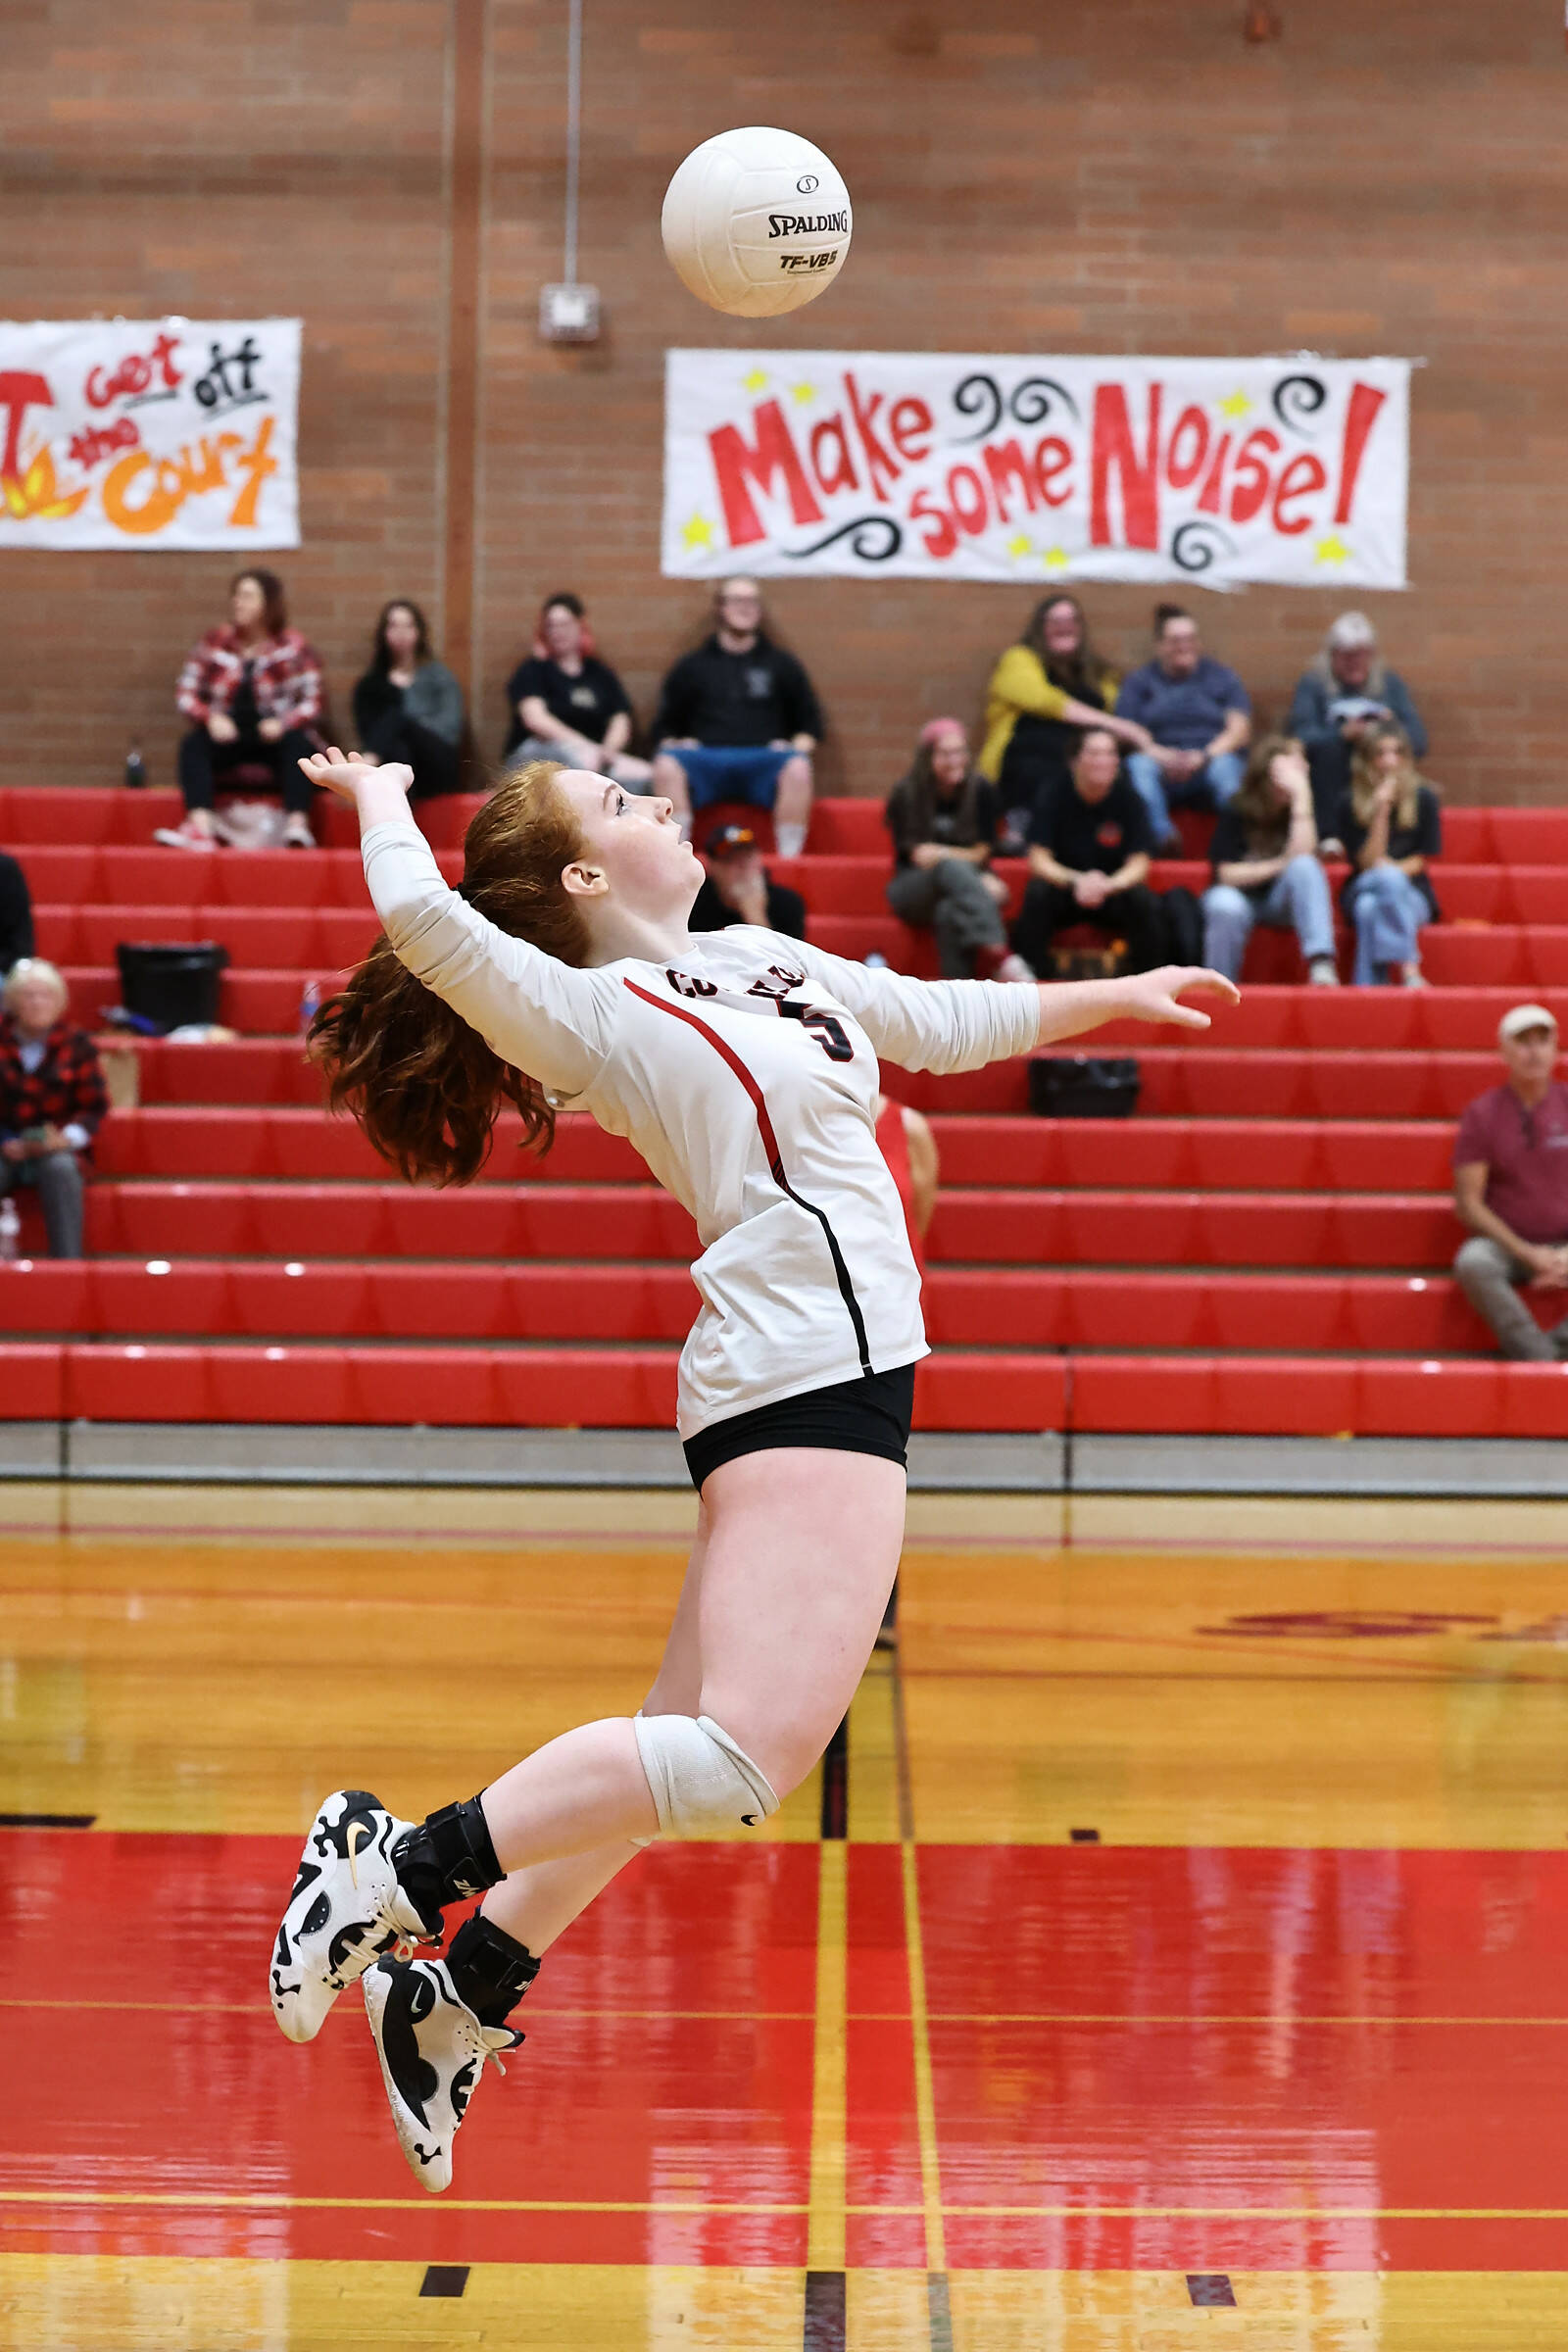 Photo by John Fisken
Maddie Georges serves during Coupeville’s Oct. 15 match against Neah Bay. She is Coupeville’s top server and leads the team in aces. Coupeville defeated Neah Bay 3-1. Coupeville High School’s varsity volleyball team is 8-3 overall this season.